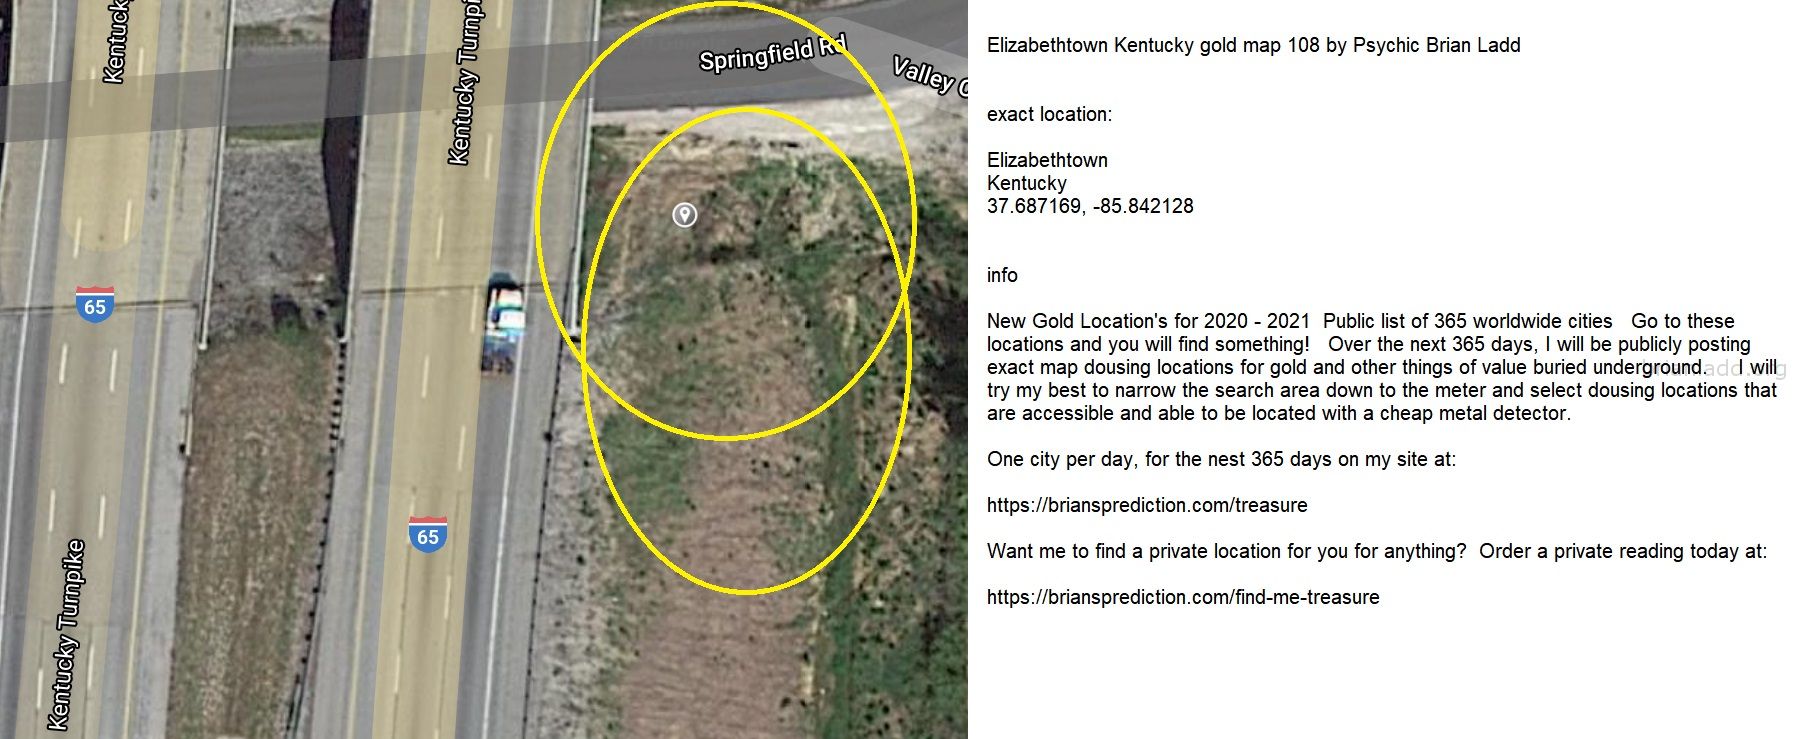 Elizabethtown Kentucky Gold Map 108 By Psychic Brian Ladd - Elizabethtown Kentucky Gold Map 108 By Psychic Brian Ladd  E...
Elizabethtown Kentucky Gold Map 108 By Psychic Brian Ladd  Exact Location:  Elizabethtown  Kentucky  37.687169, -85.842128  Info  New Gold Location'S For 2020 - 2021  Public List Of 365 Worldwide Cities  Go To These Locations And You Will Find Something!  Over The Next 365 Days, I Will Be Publicly Posting Exact Map Dousing Locations For Gold And Other Things Of Value Buried Underground.  I Will Try My Best To Narrow The Search Area Down To The Meter And Select Dousing Locations That Are Accessible And Able To Be Located With A Cheap Metal Detector.  One City Per Day, For The Nest 365 Days On My Site At:   https://briansprediction.com/Treasure  Want Me To Find A Private Location For You For Anything?  Order A Private Reading Today At:   https://briansprediction.com/Find-Me-Treasure
